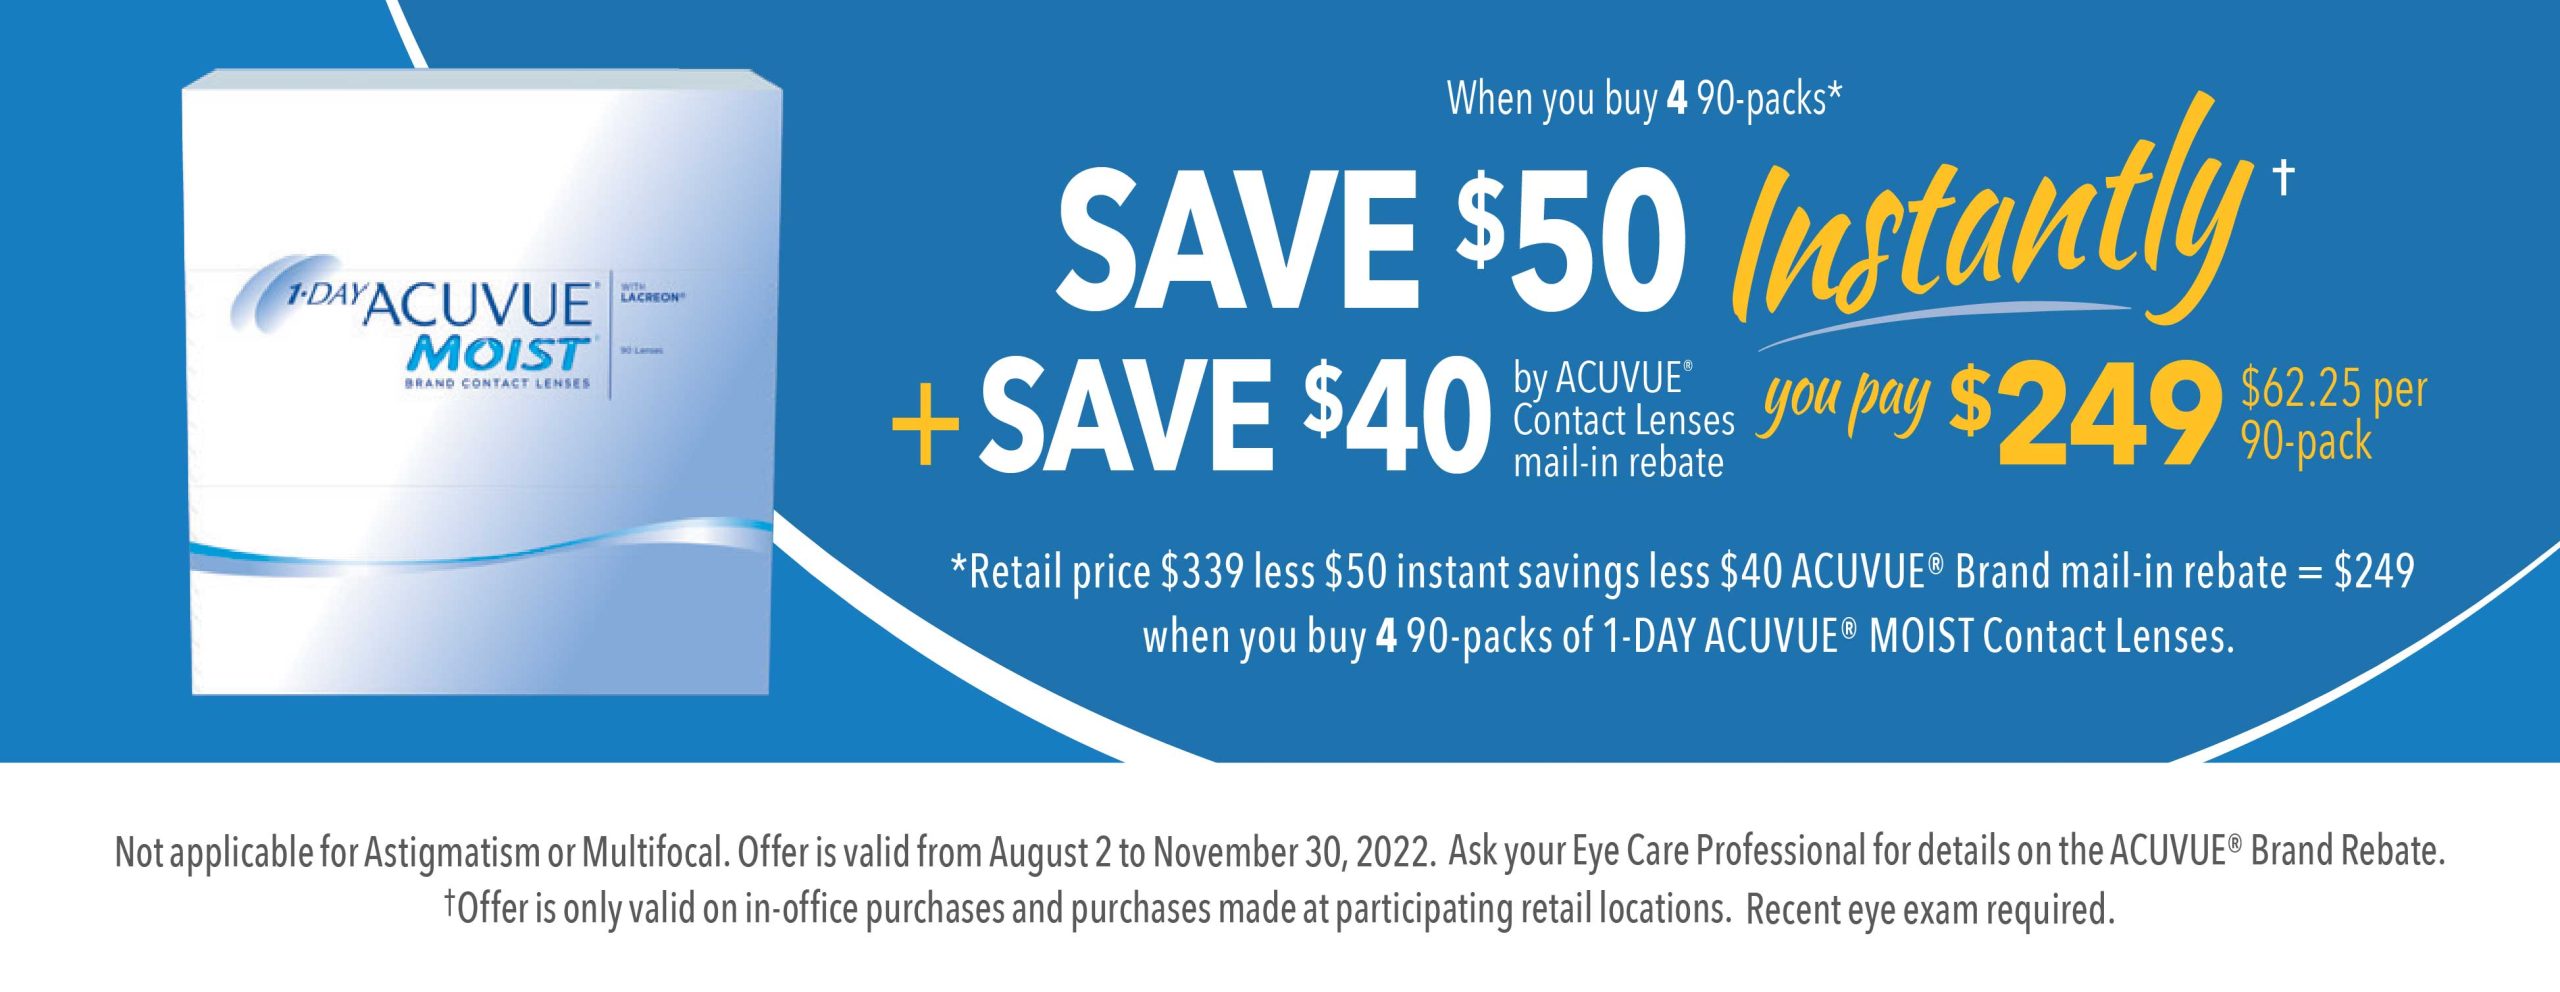 Save when you buy 4 90-packs of Acuvue Moist Contacts